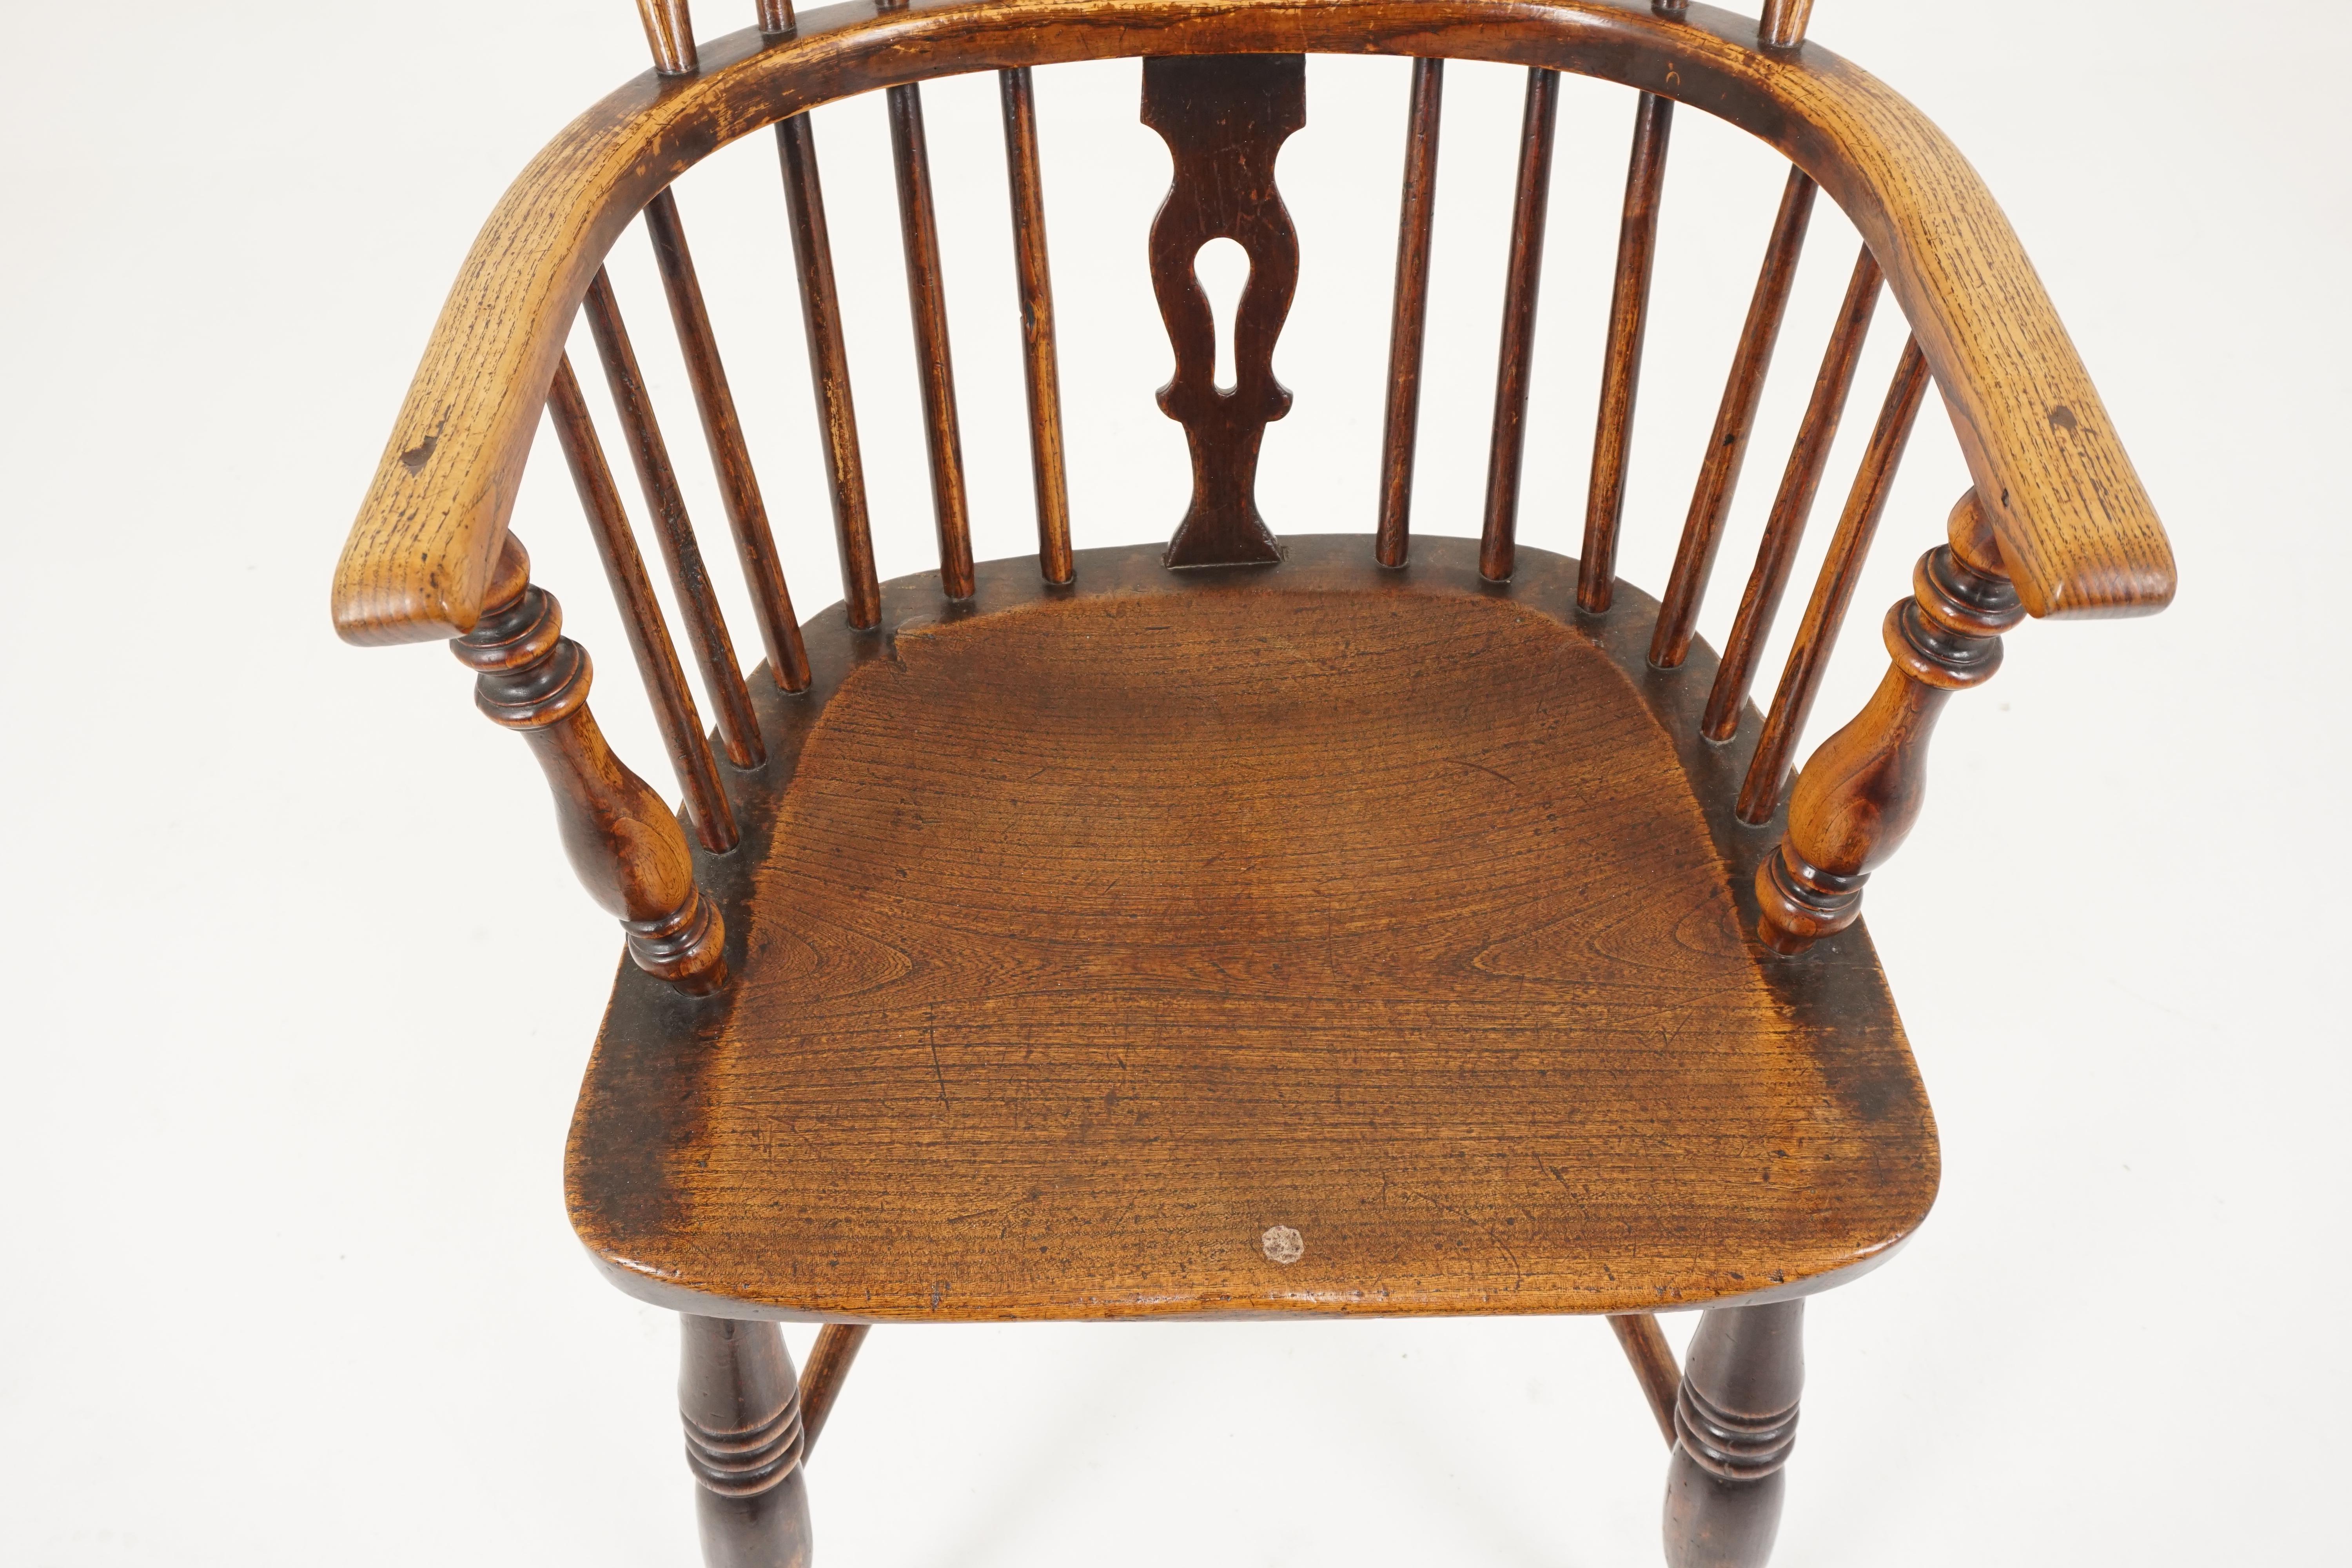 Antique windsor arm chair, country chair, elm + yew, Scotland 1850, H542

Scotland 1850
Elm + Yew
Original finish
Consists of a hoop back leading down to a central pierced splat of stylized fleur de lys decorations
With three spindles to either